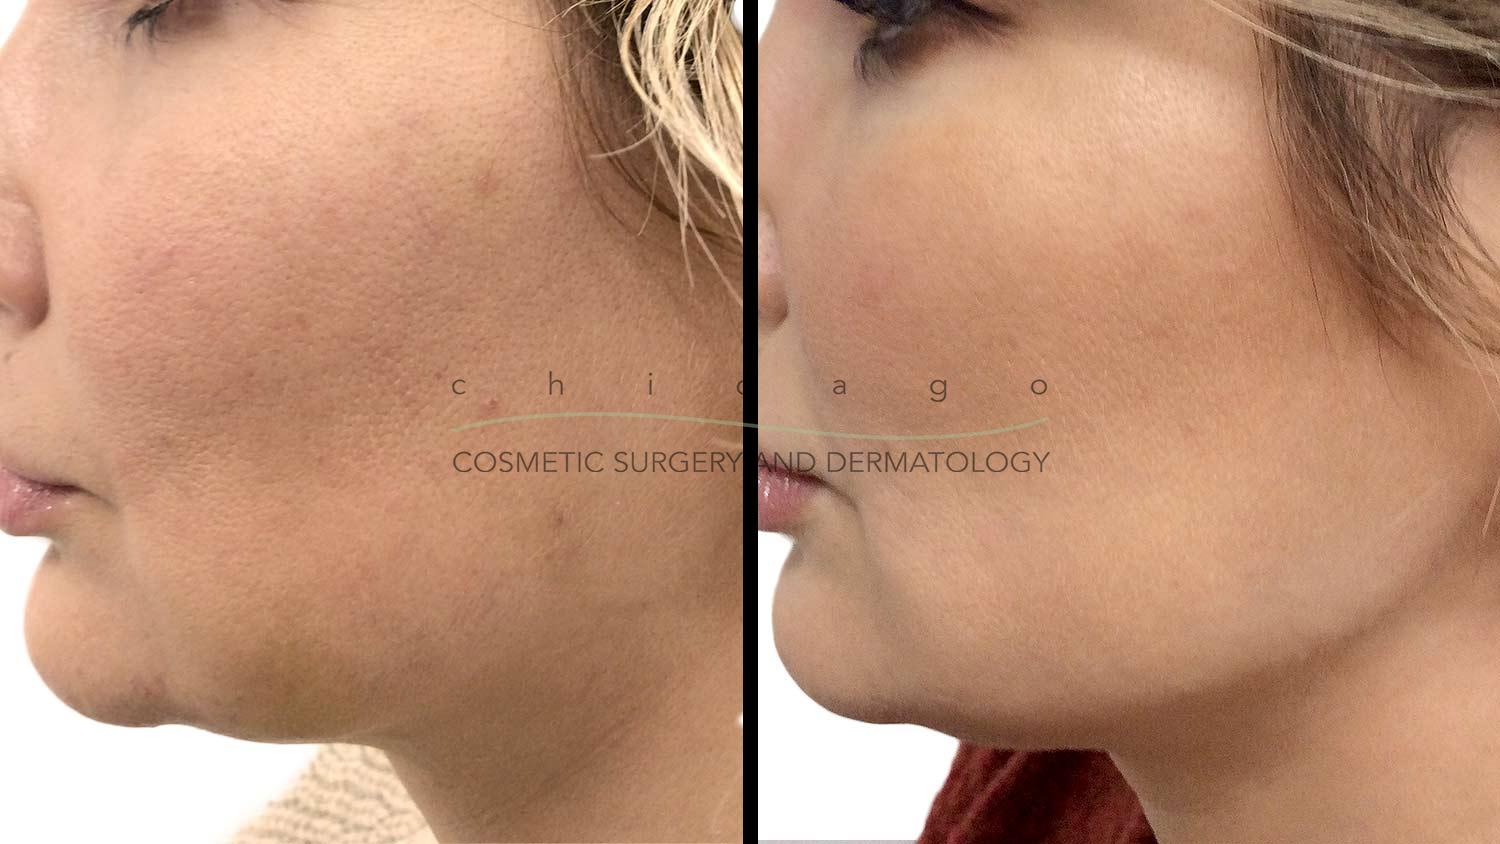 Restylane Lyft filler injectable before and after